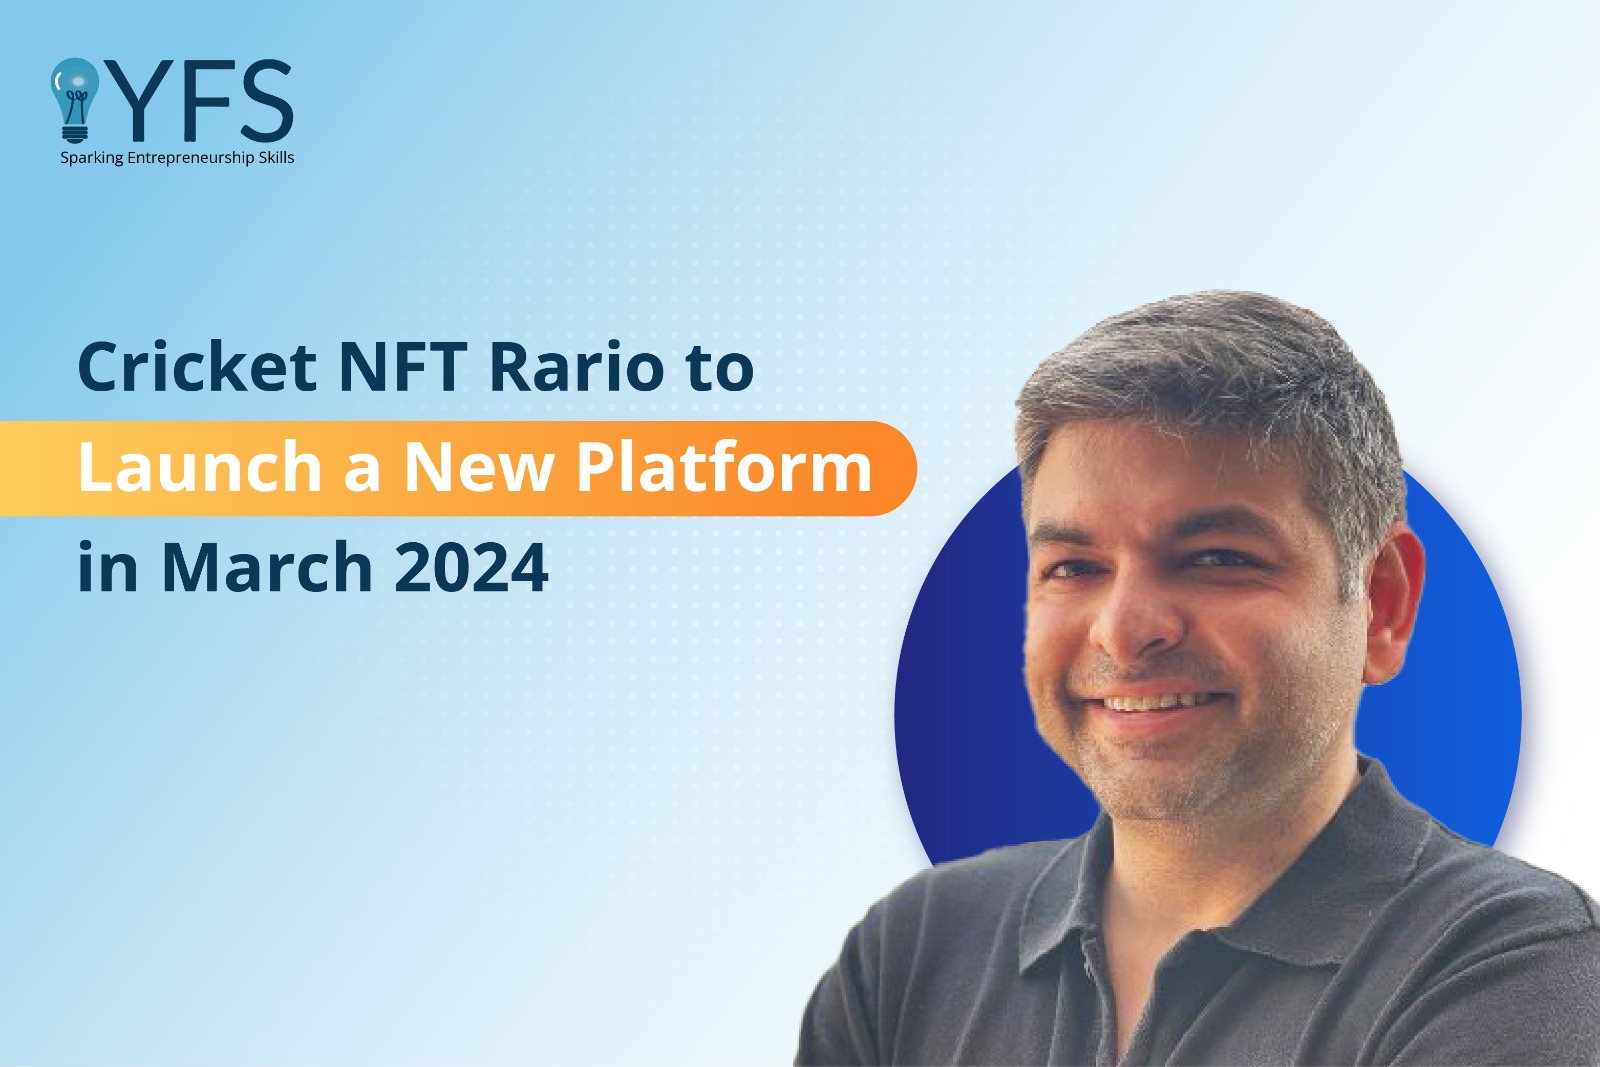 Cricket NFT Rario to Launch a New Platform in March 2024